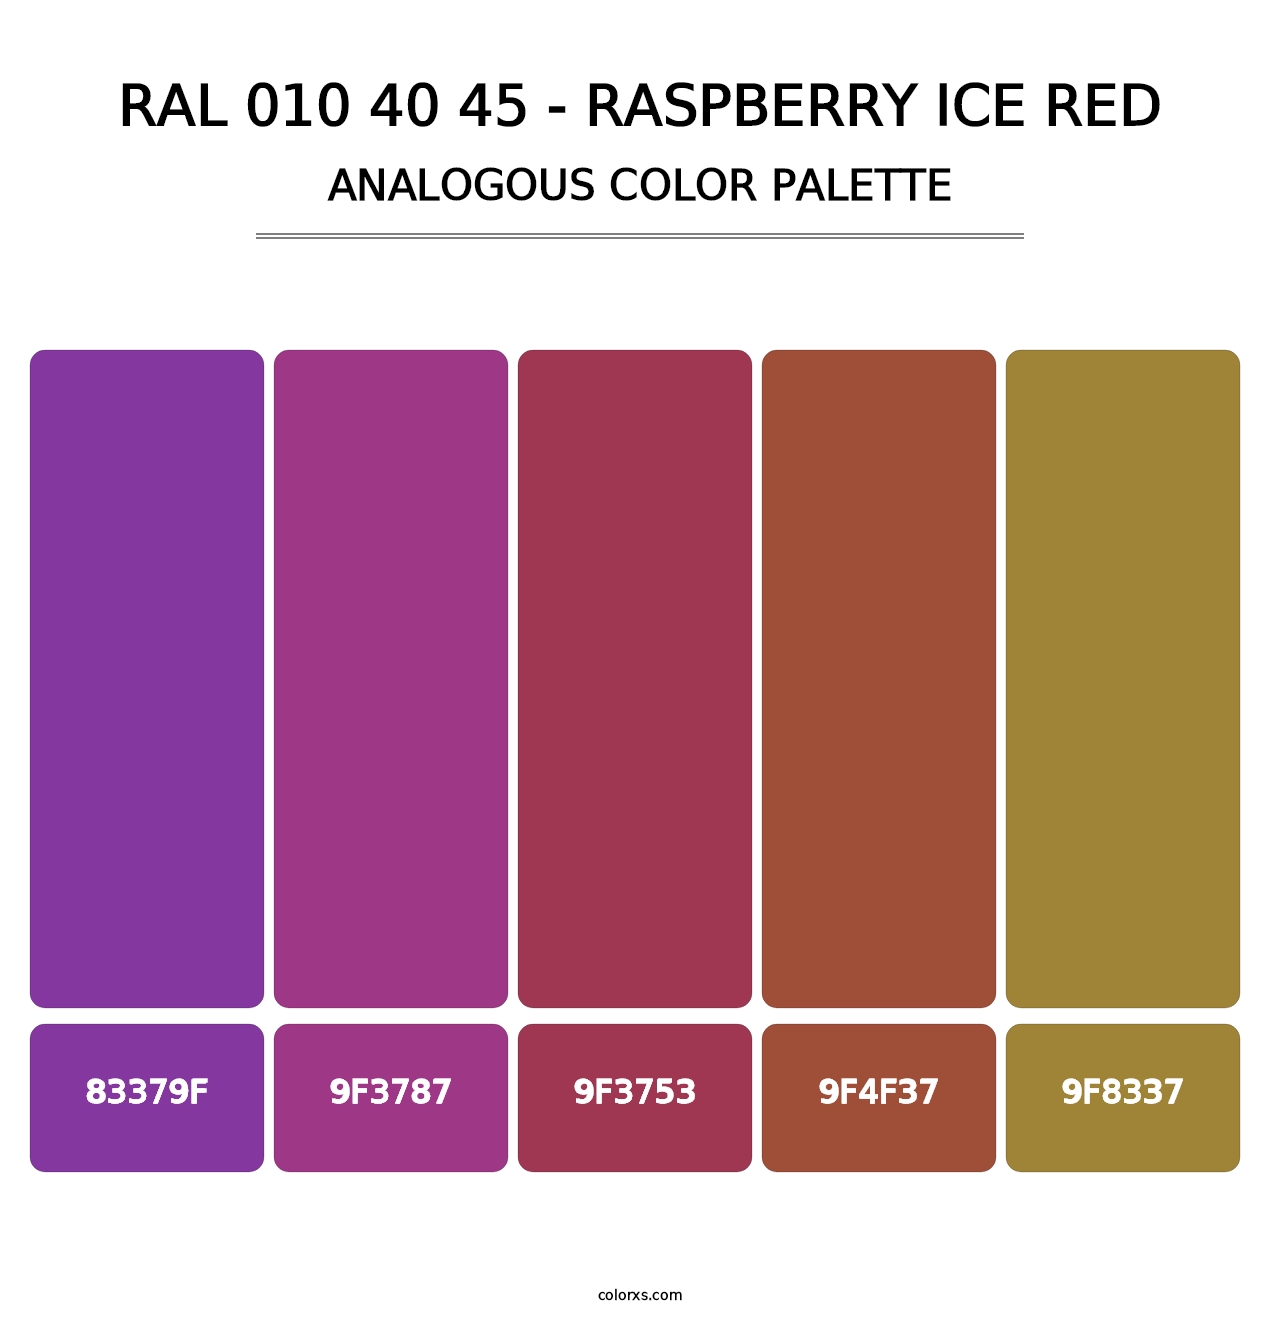 RAL 010 40 45 - Raspberry Ice Red - Analogous Color Palette